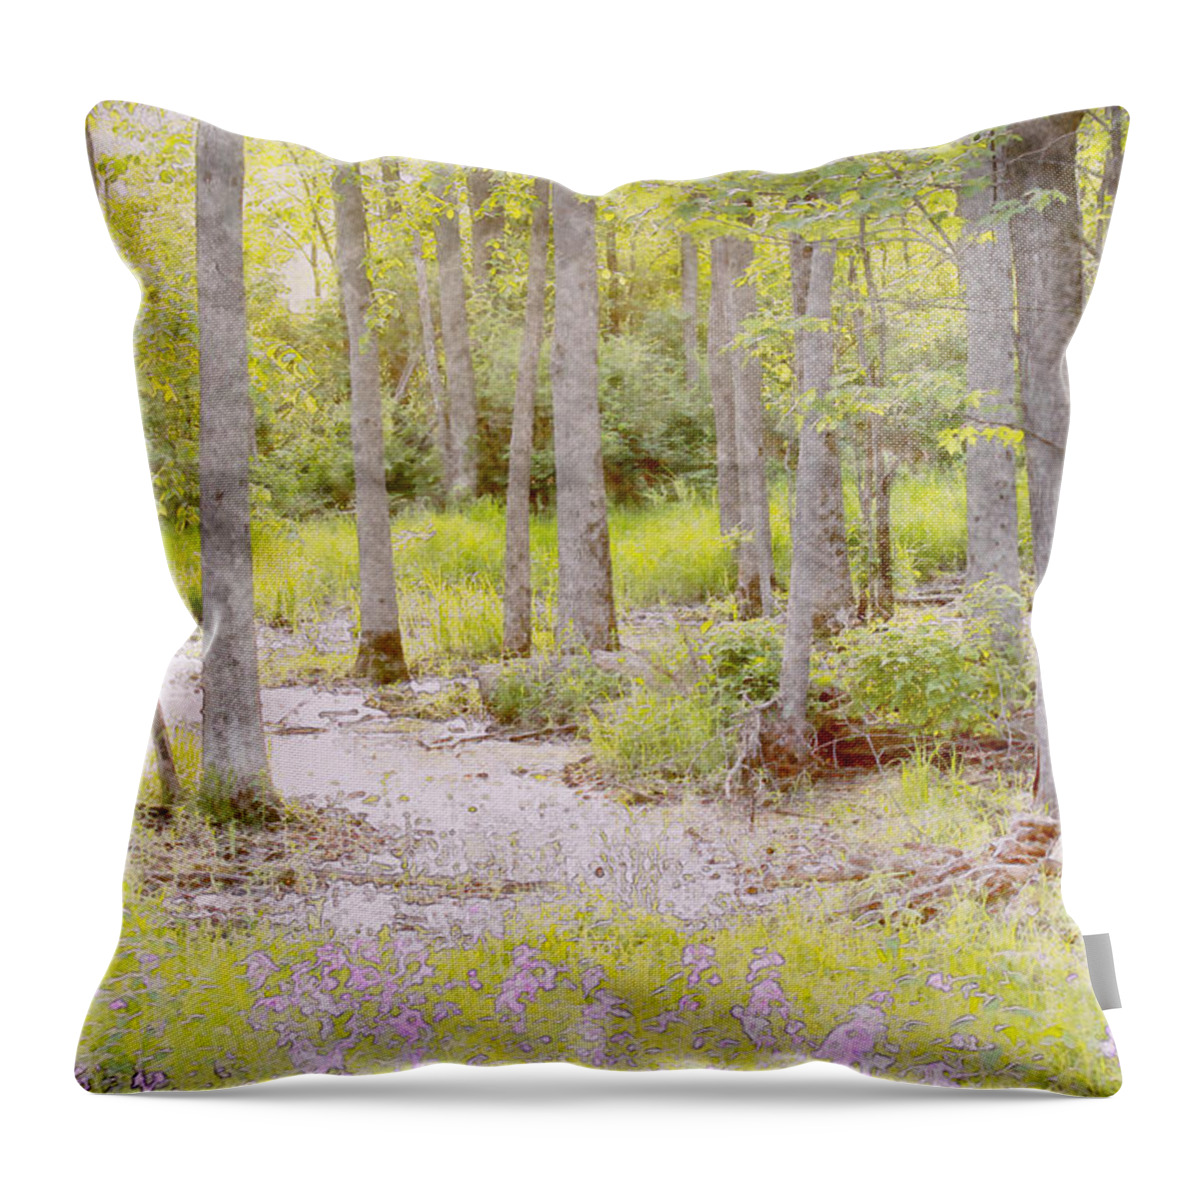 Landscape Throw Pillow featuring the photograph Still Water by David Stasiak